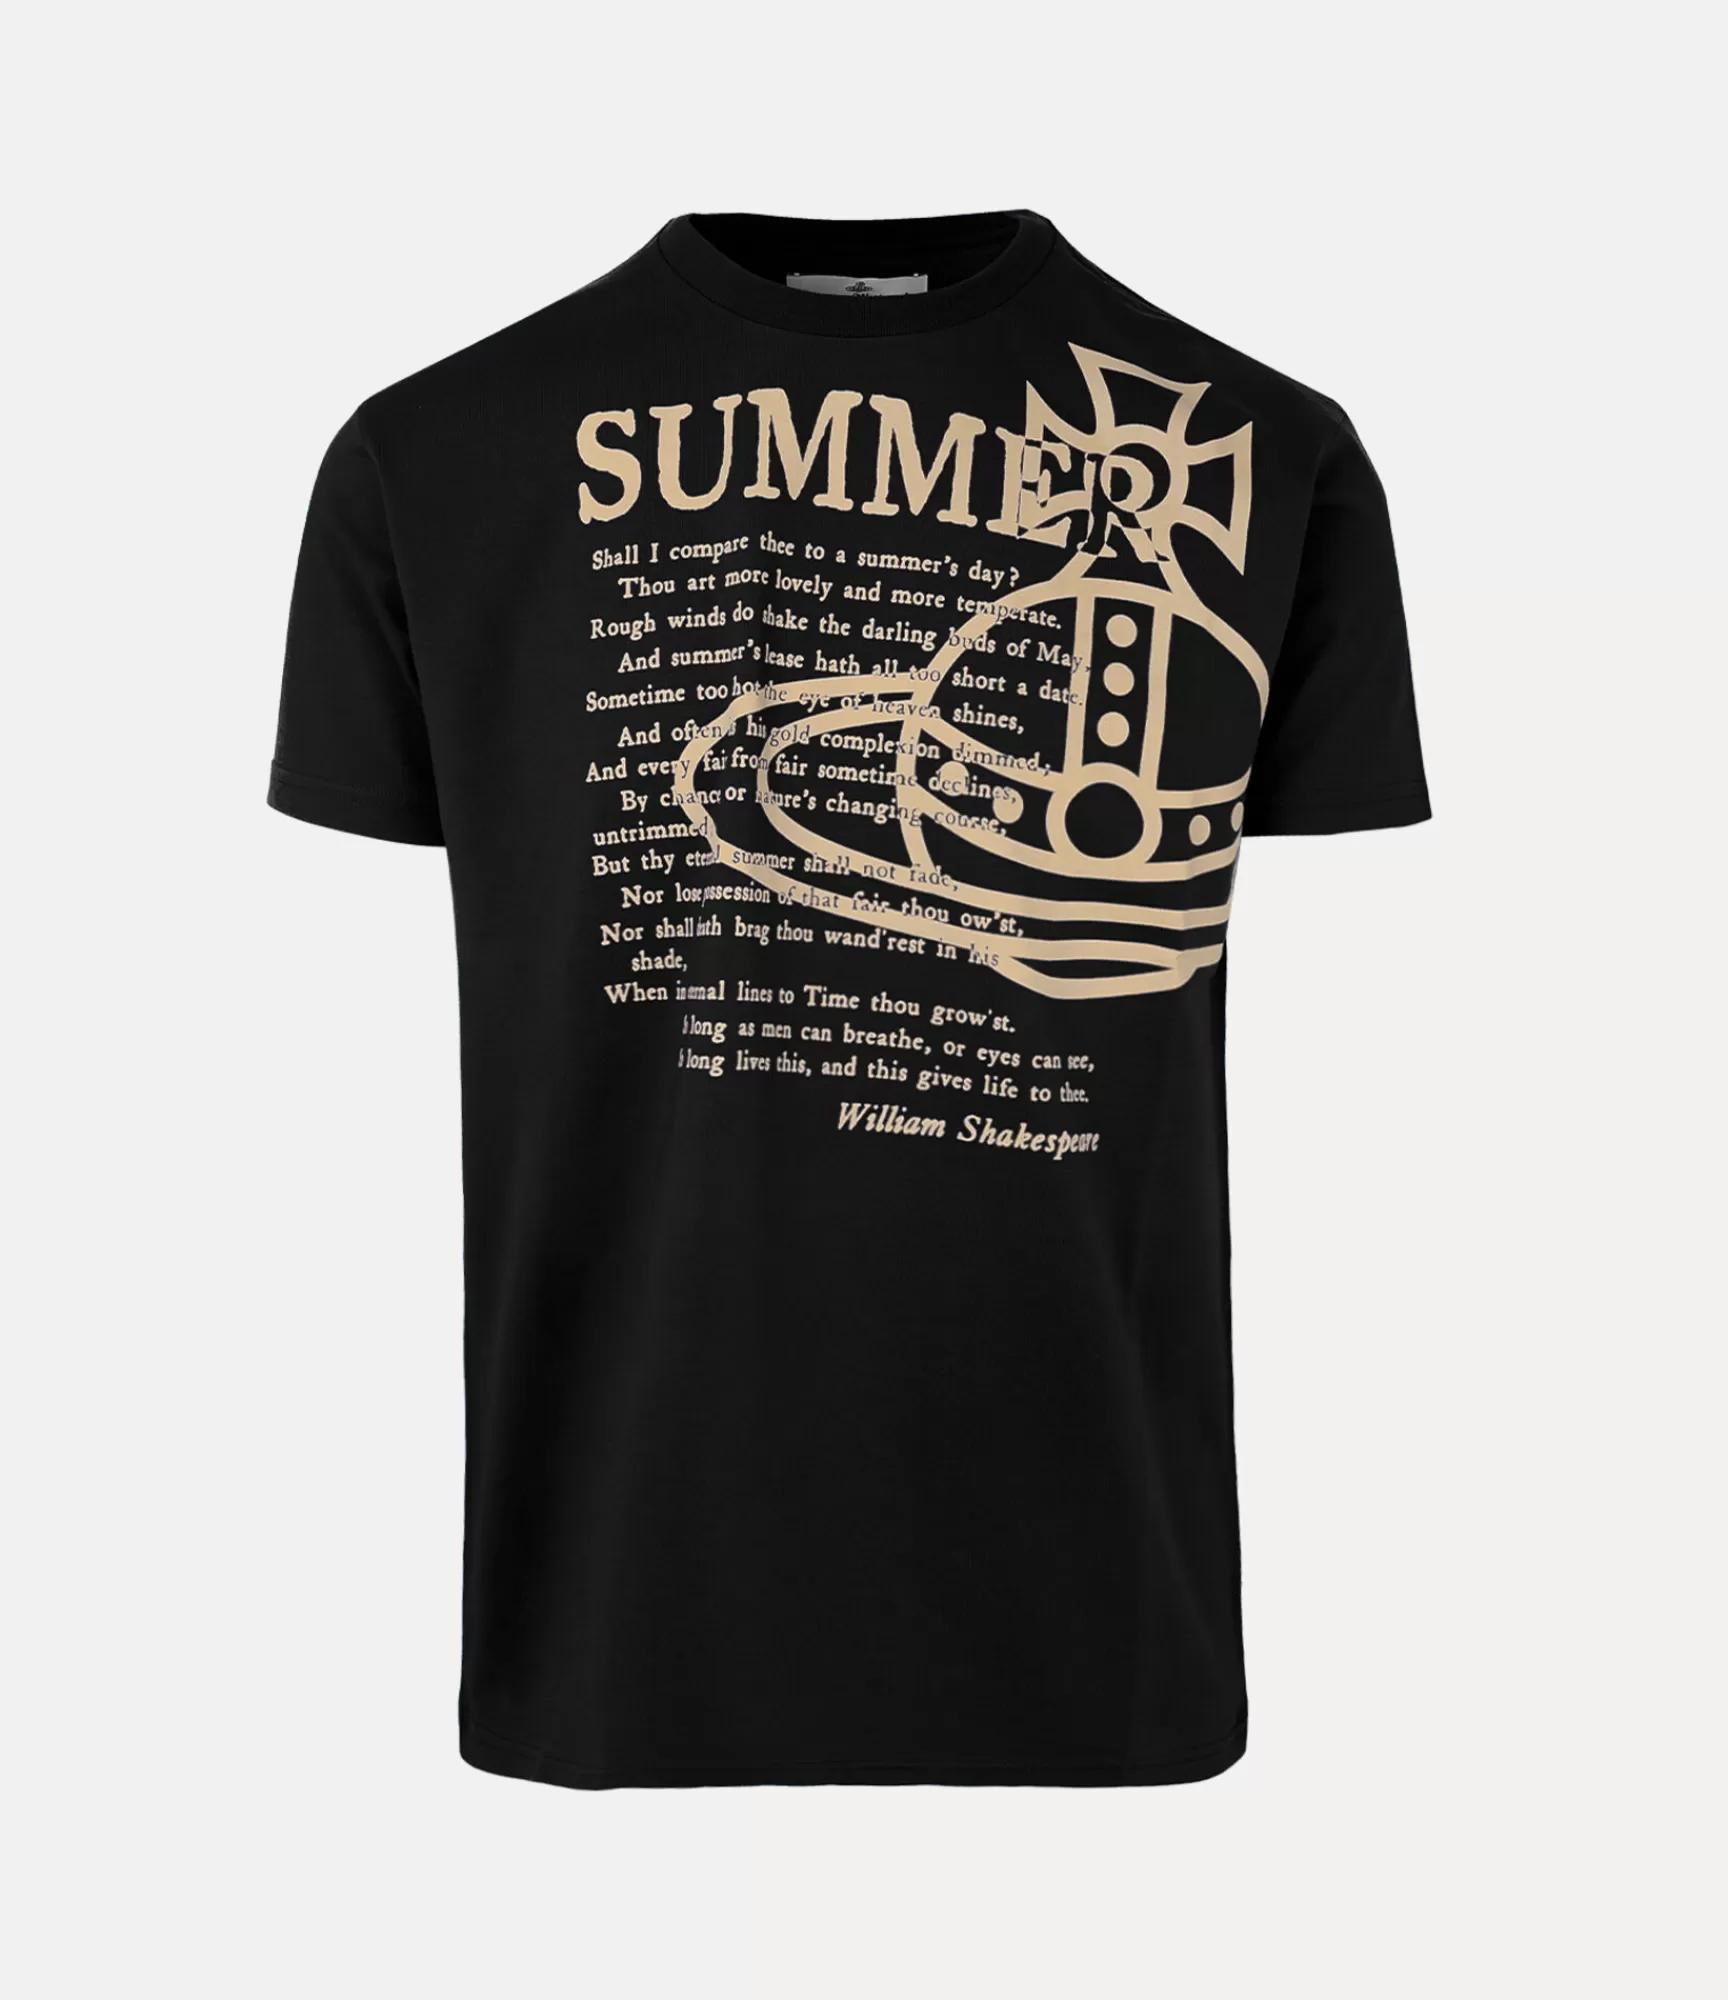 Vivienne Westwood T-Shirts and Polos | Sweatshirts and T-Shirts*Summer classic t-shirt Black